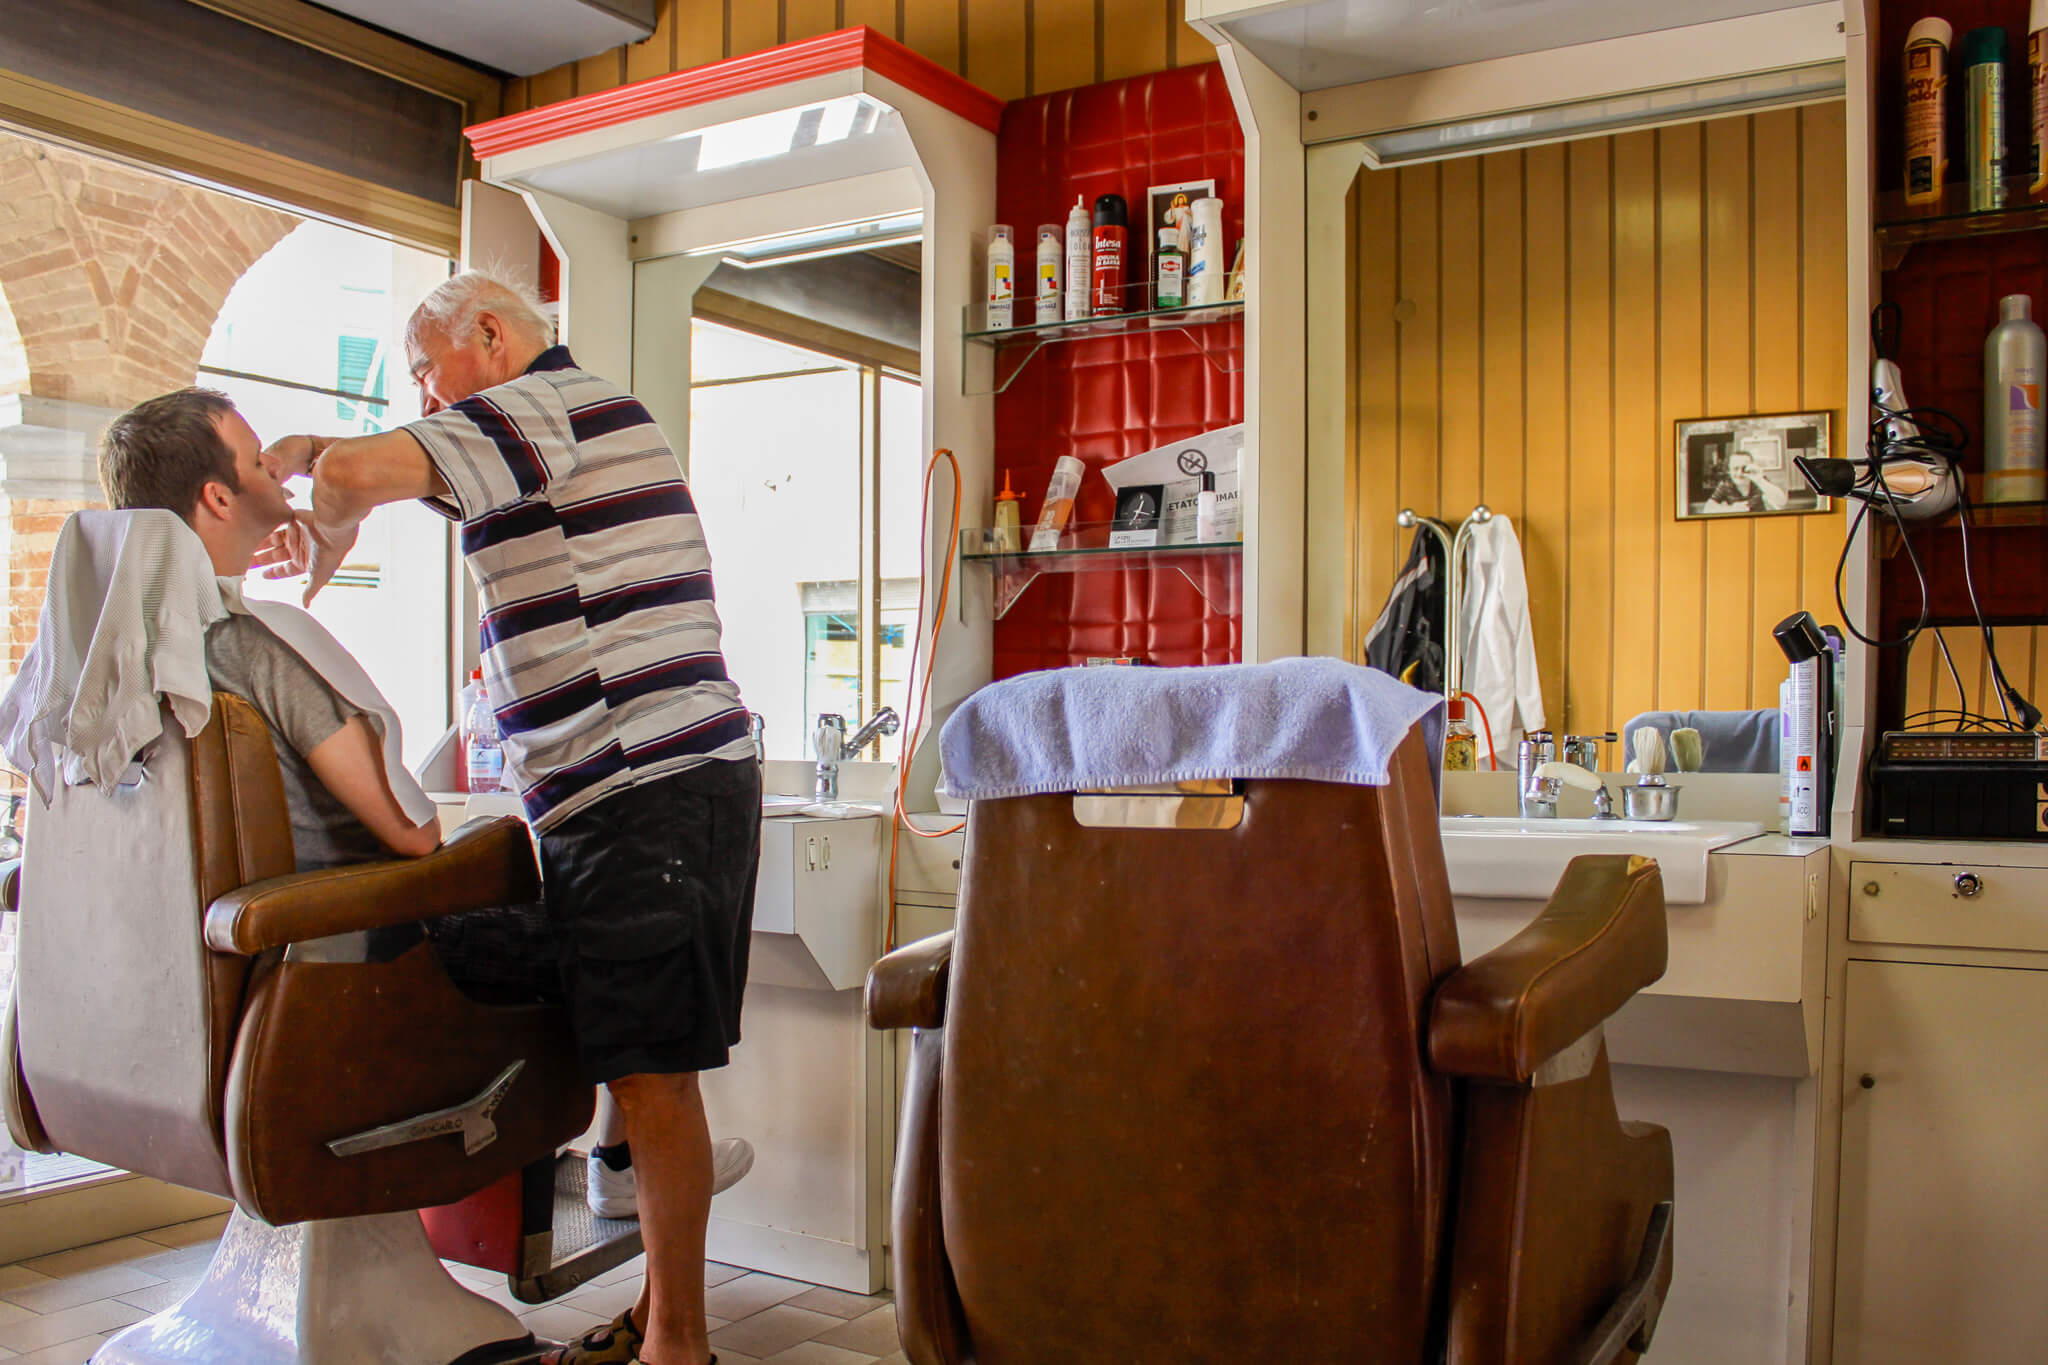 Getting a shave from a barber in Urbania, Italy